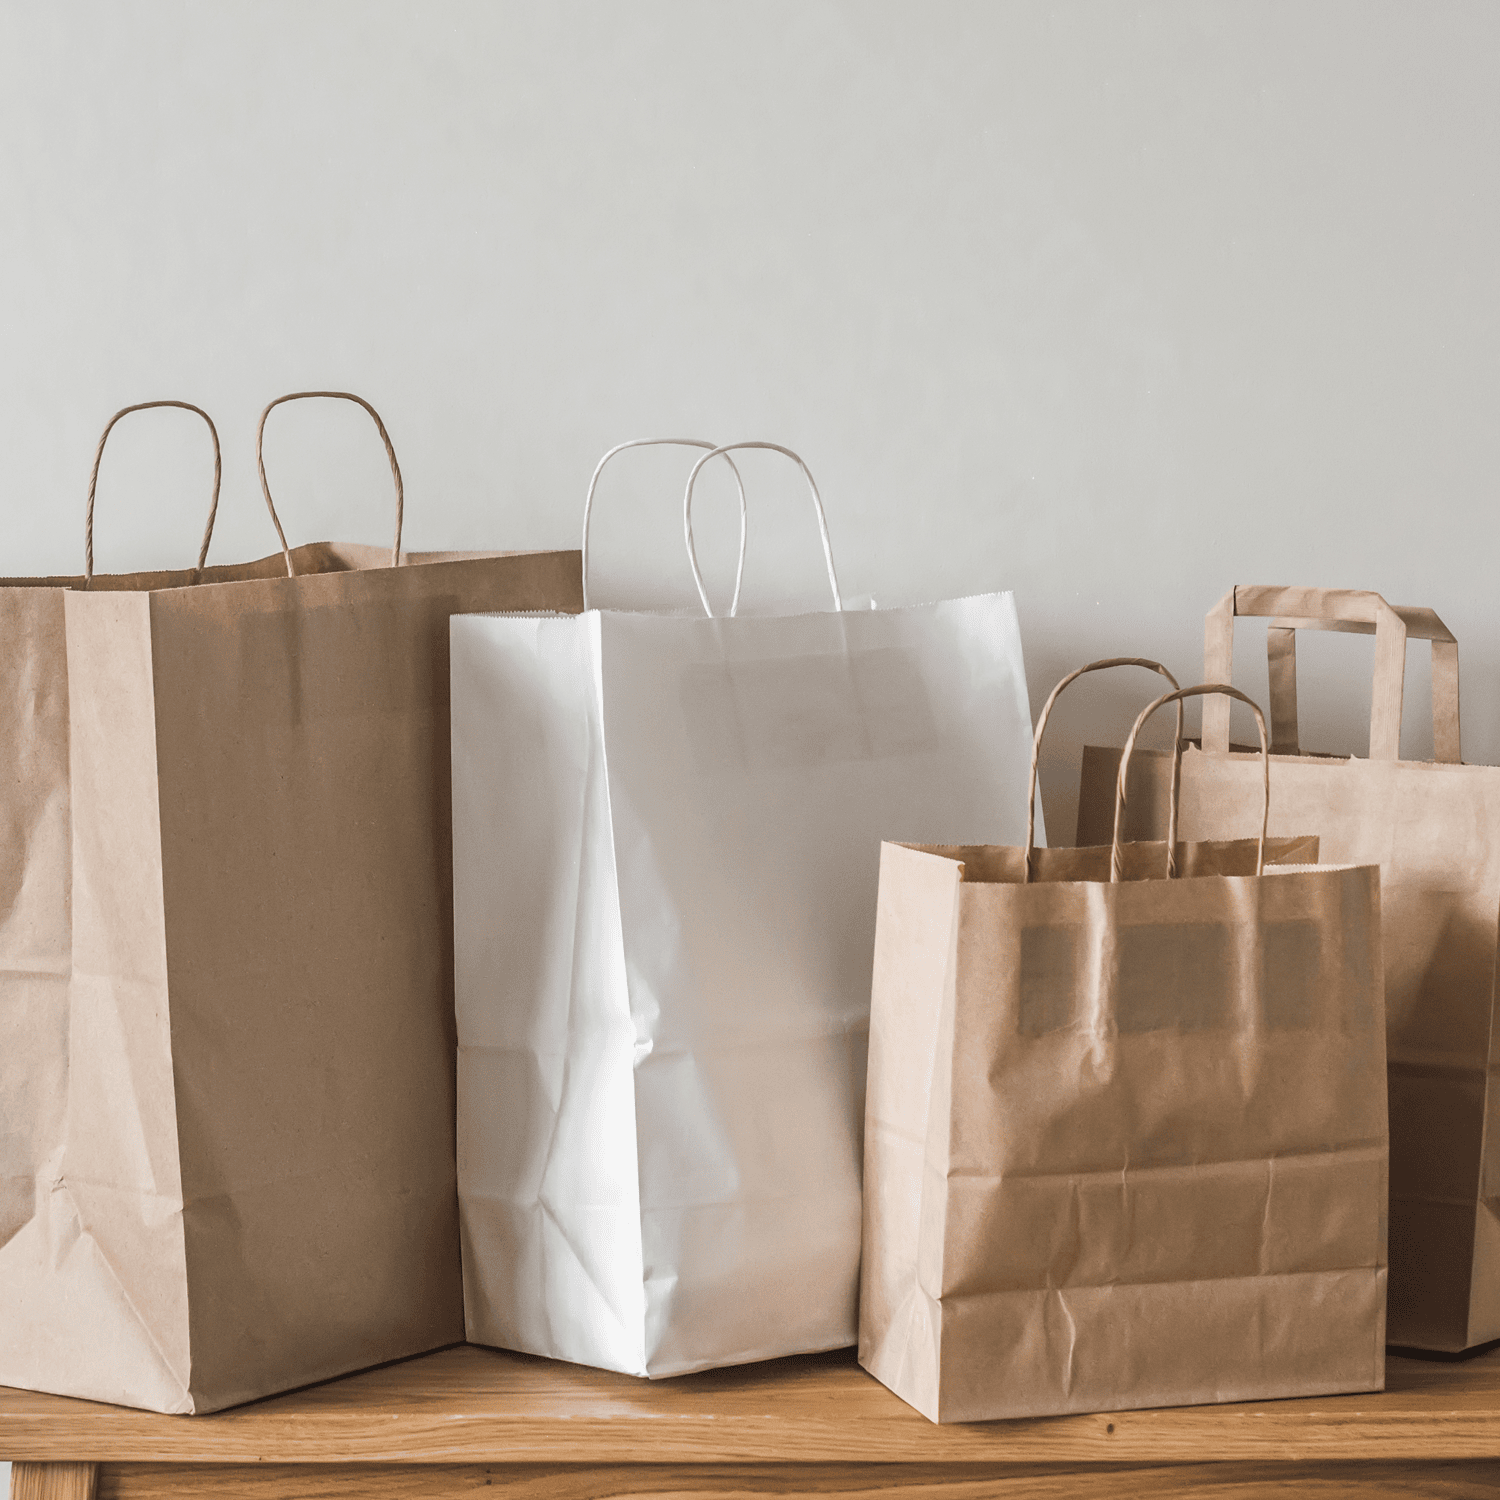 Different types of brown paper bags with and without handles